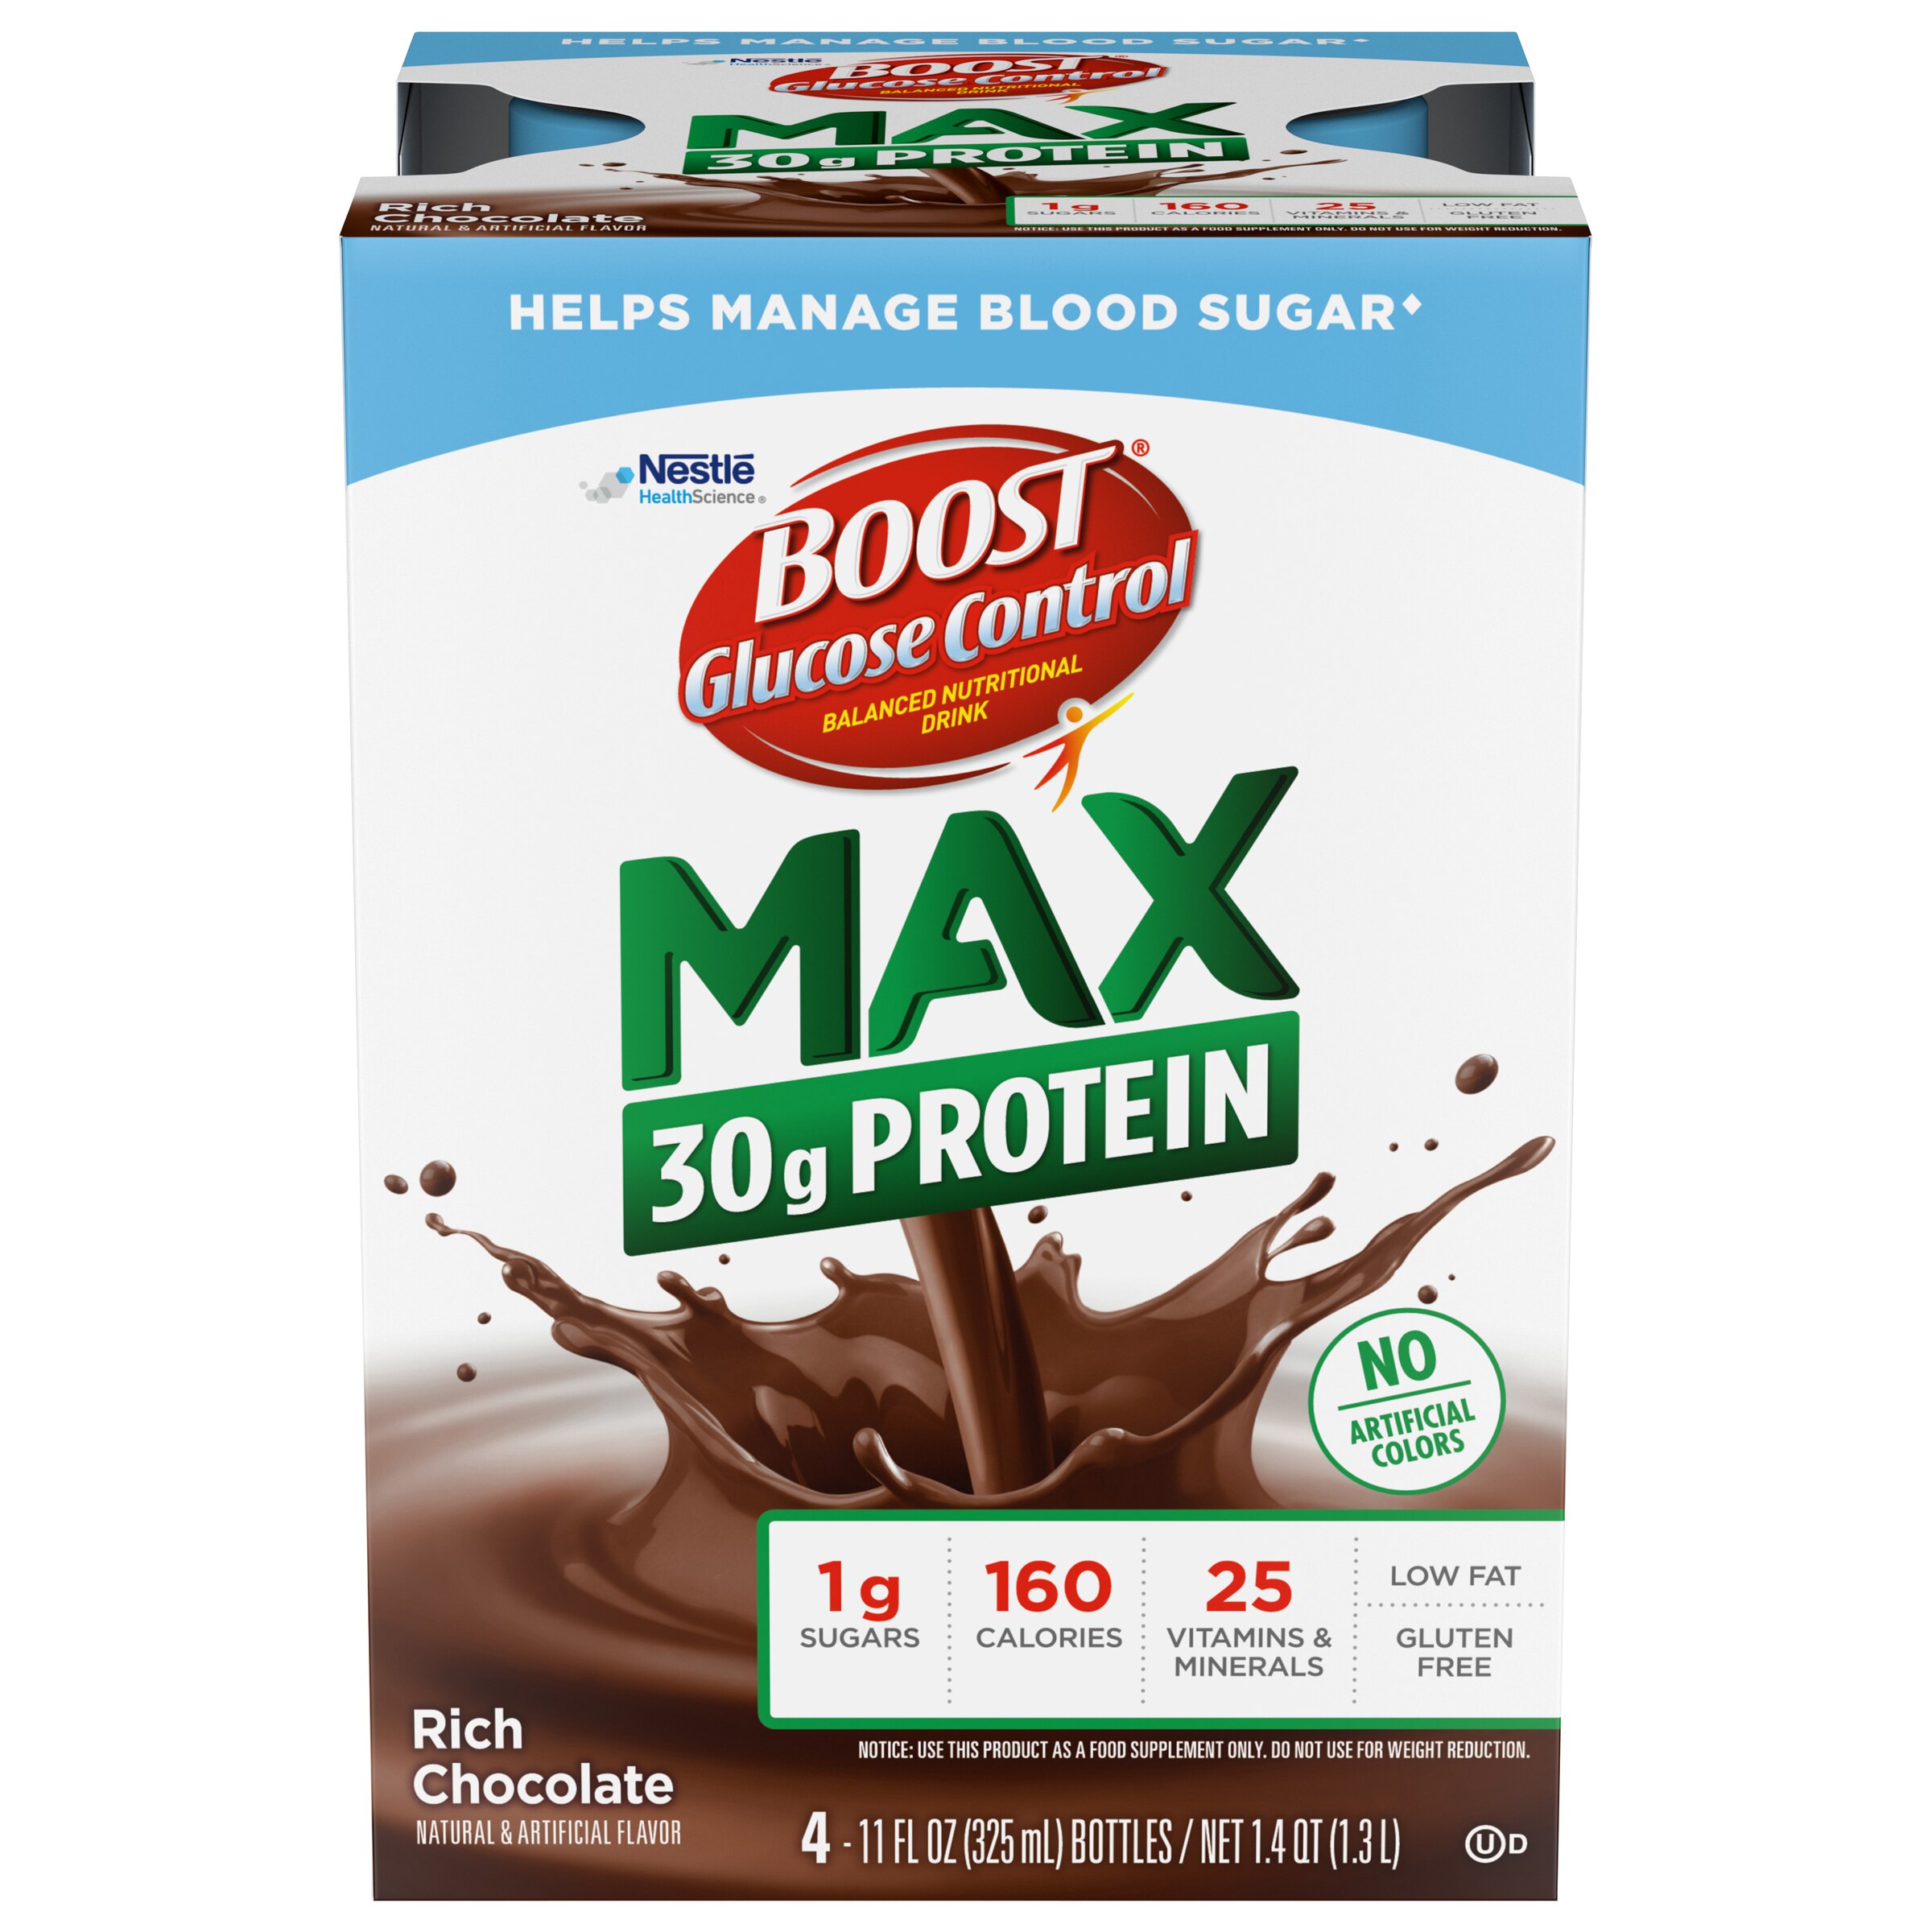 BOOST Glucose Control Max 30g Protein Ready to Drink Nutritional Drink, 4 - 11 FL OZ Bottles